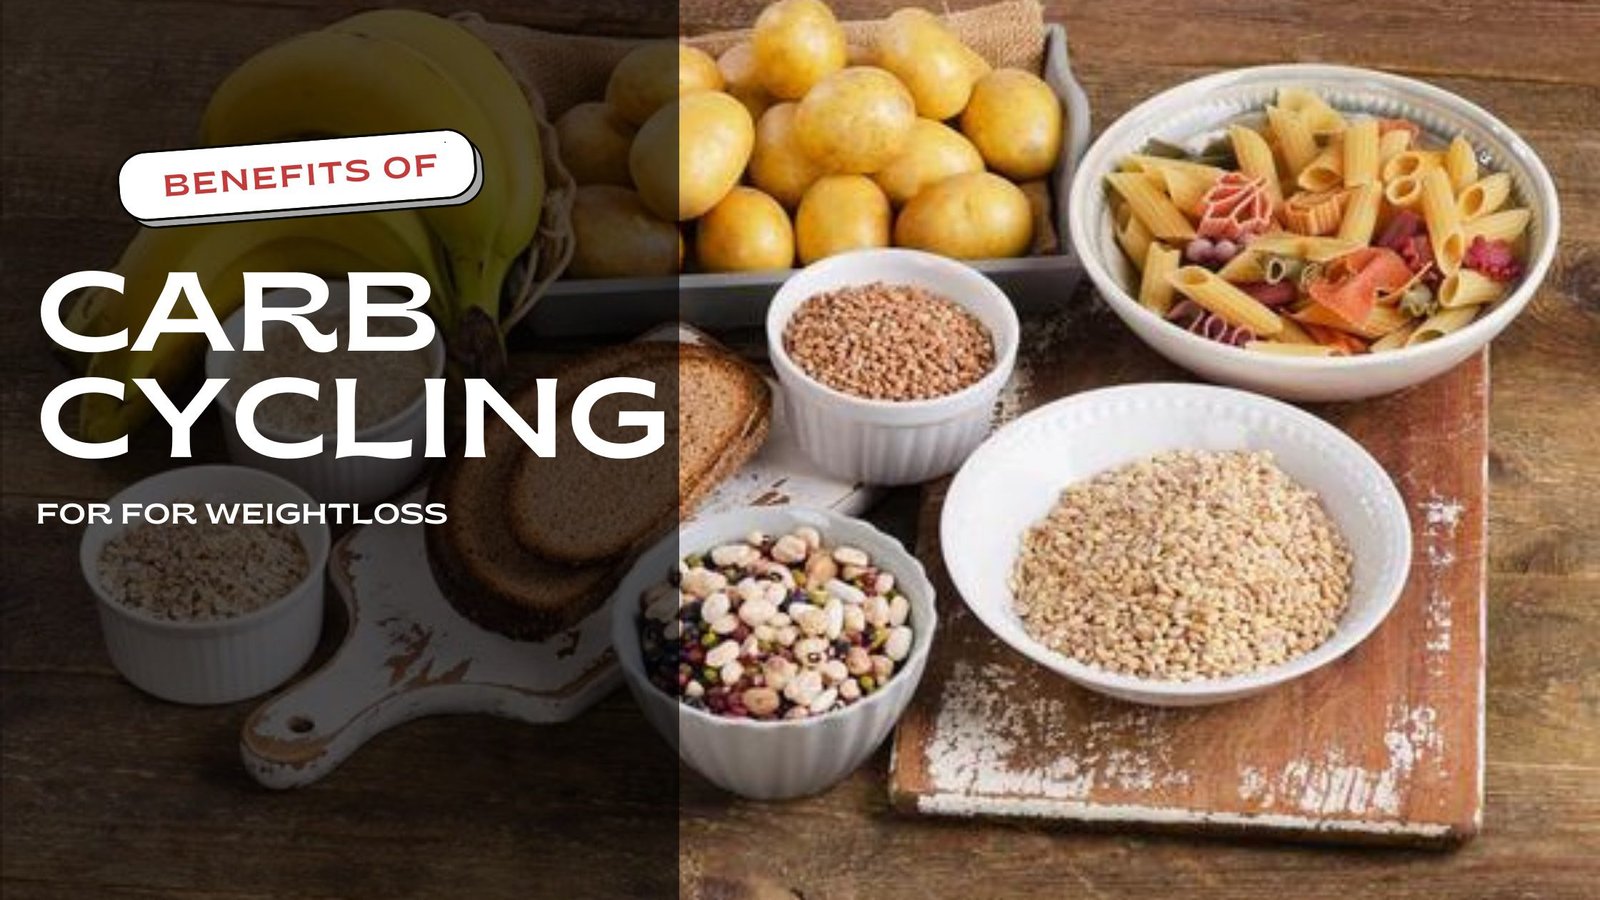 Benefits of Carb Cycling